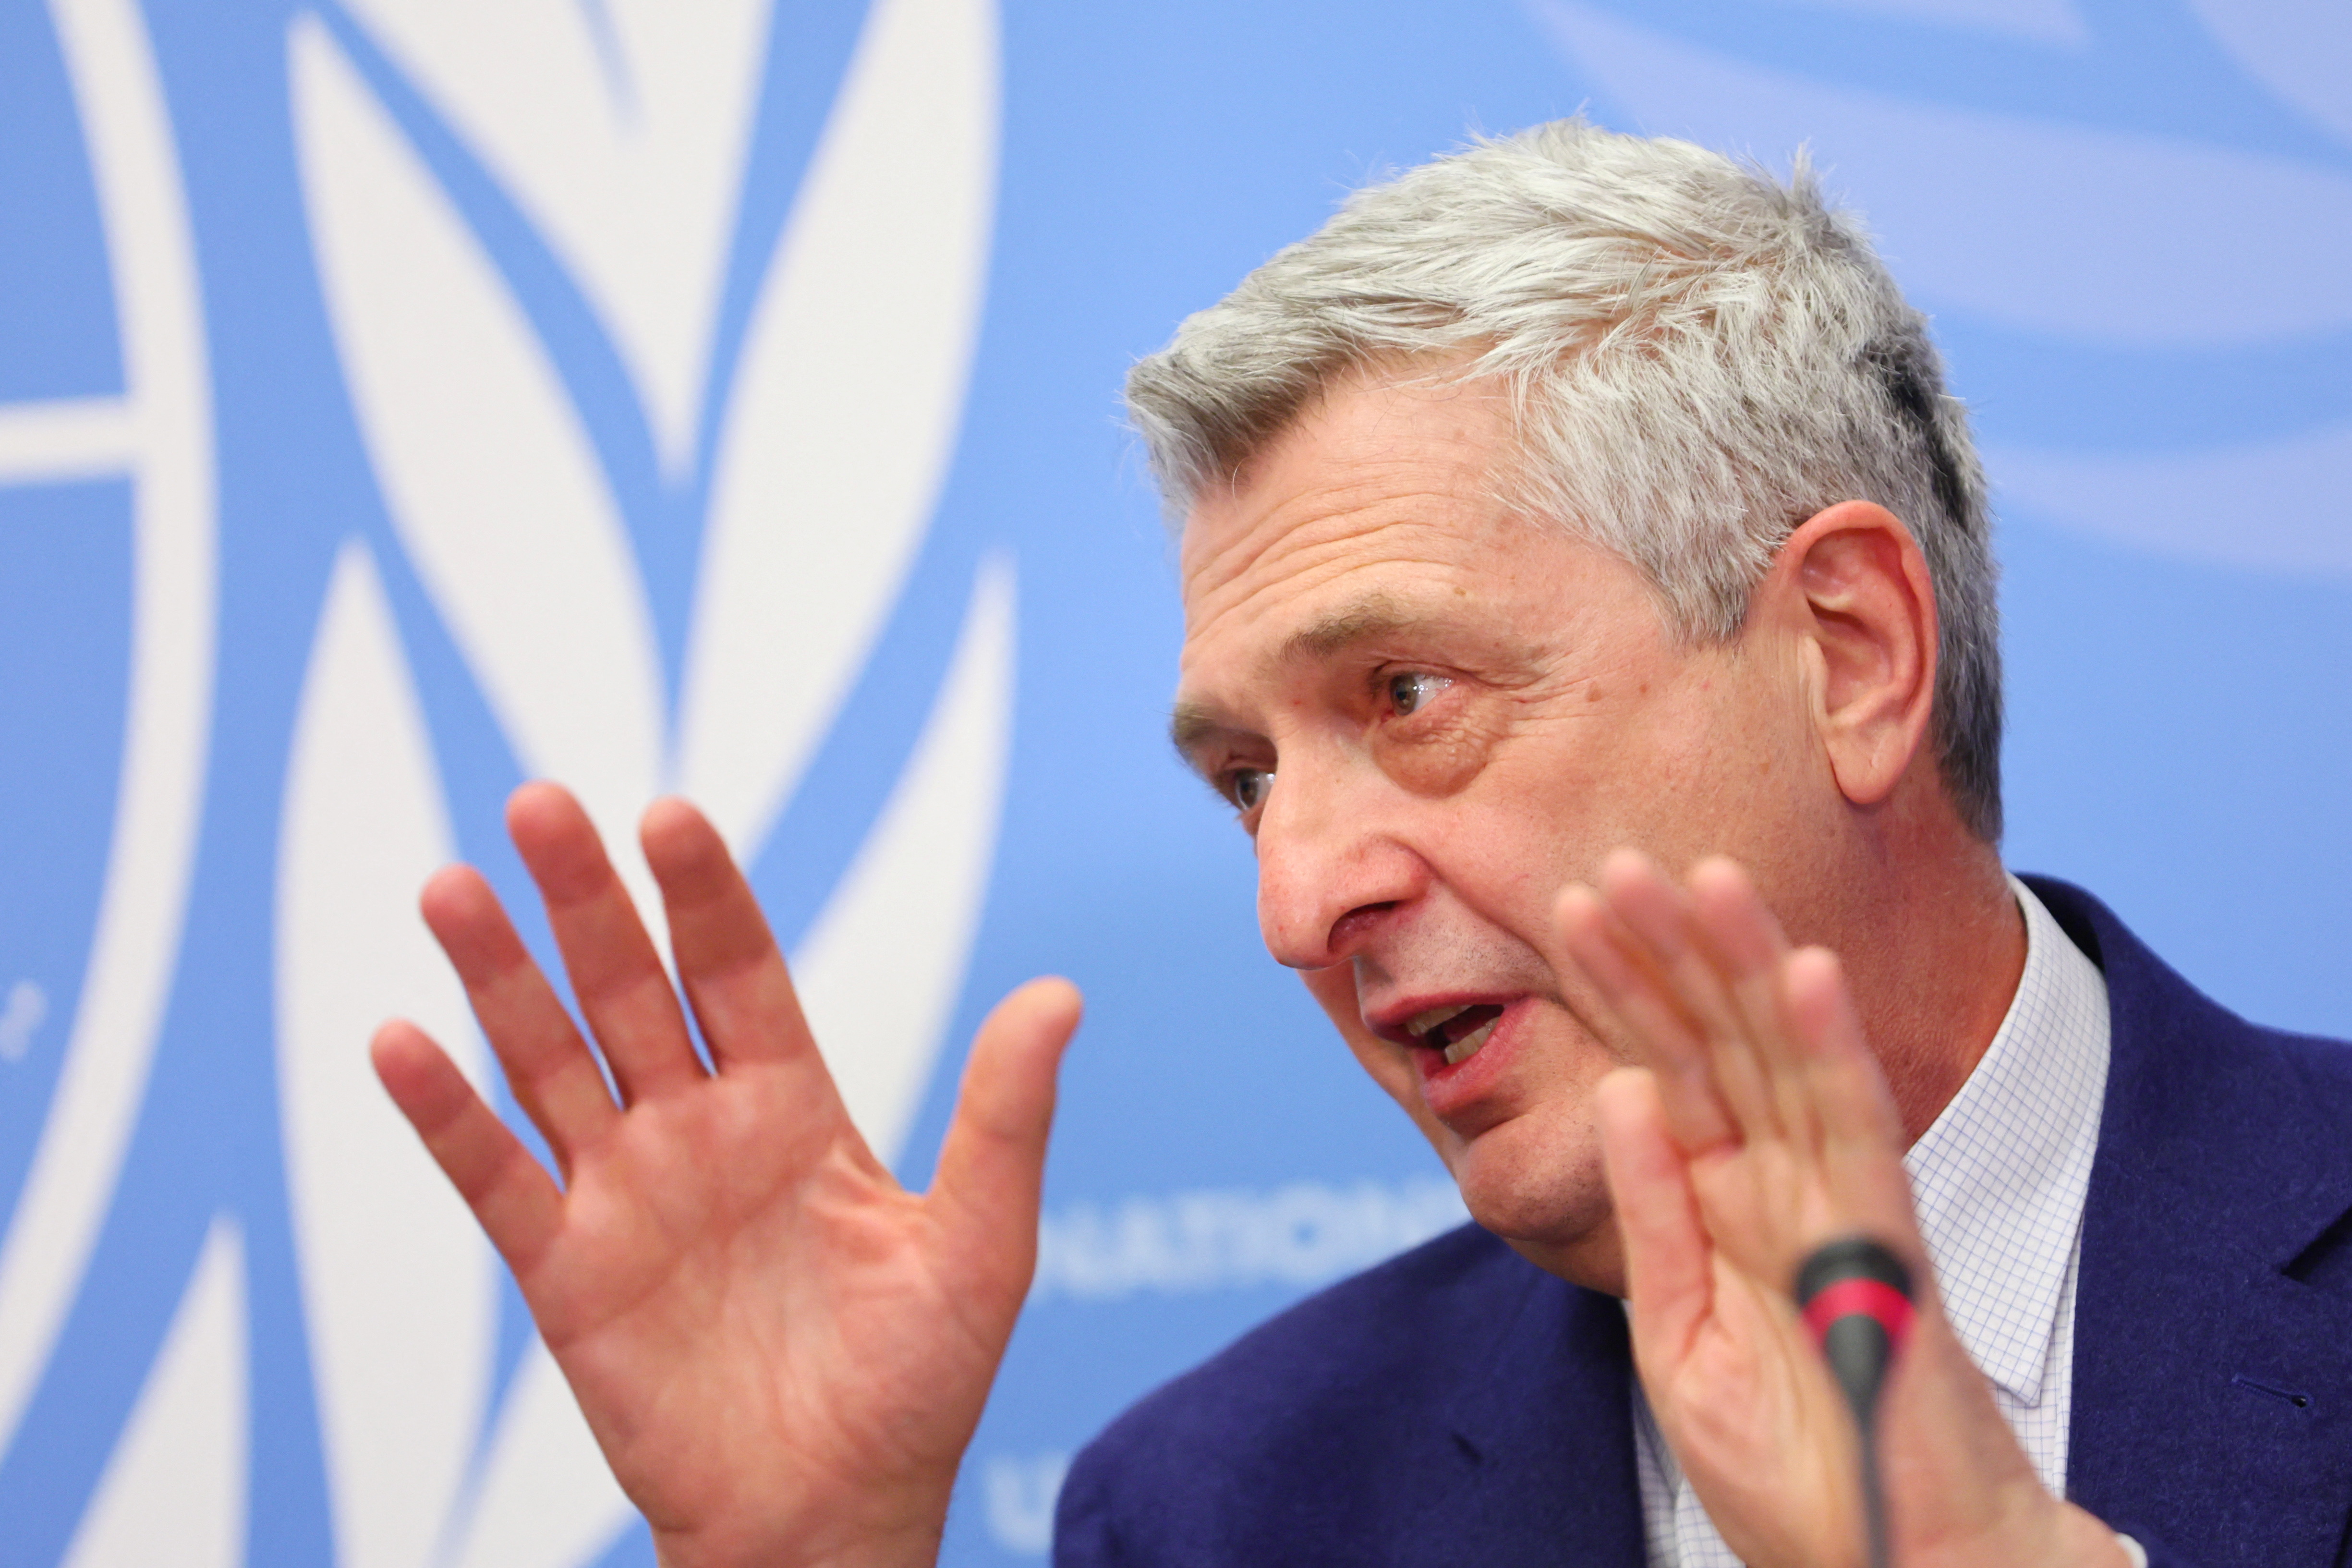 Humanitarian appeals in support of the people of Ukraine at the United Nations in Geneva